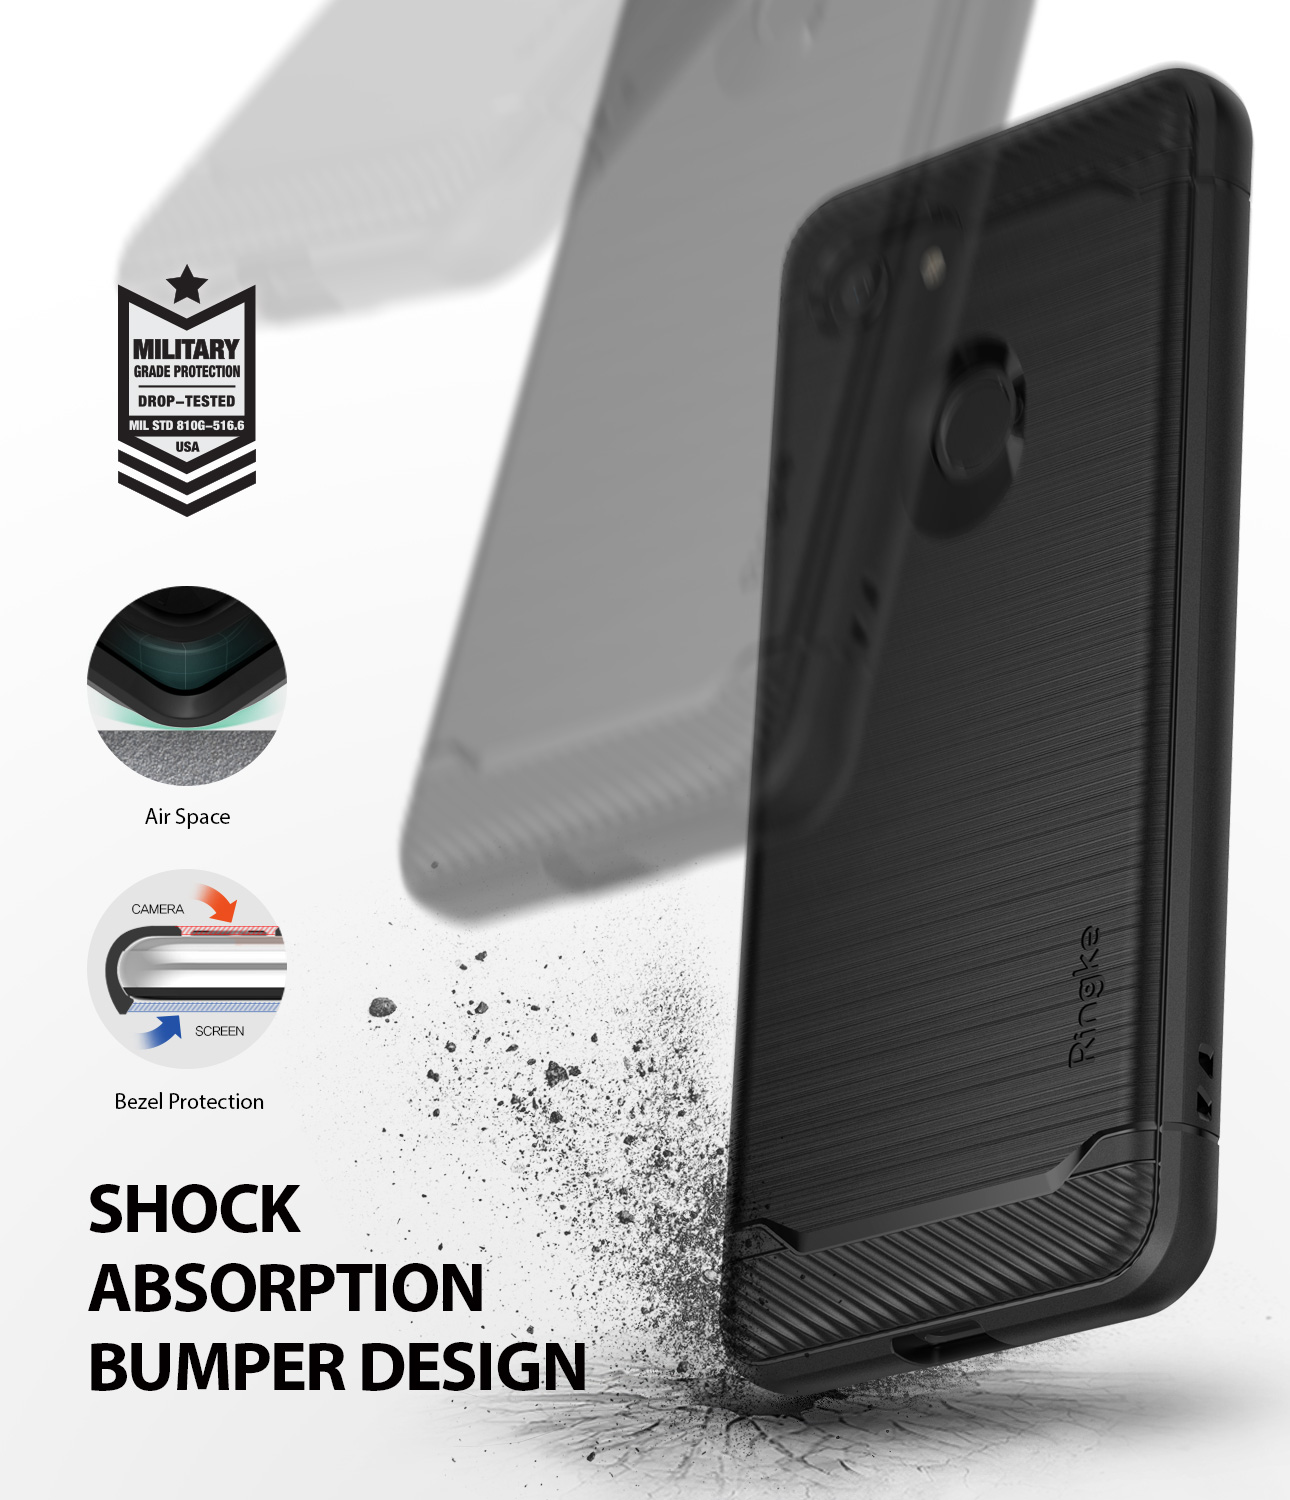 Ringke Onyx Case Compatible with Google Pixel 3, Tough Rugged TPU Heavy Duty Protective Cover - Lilac Purple - image 4 of 6